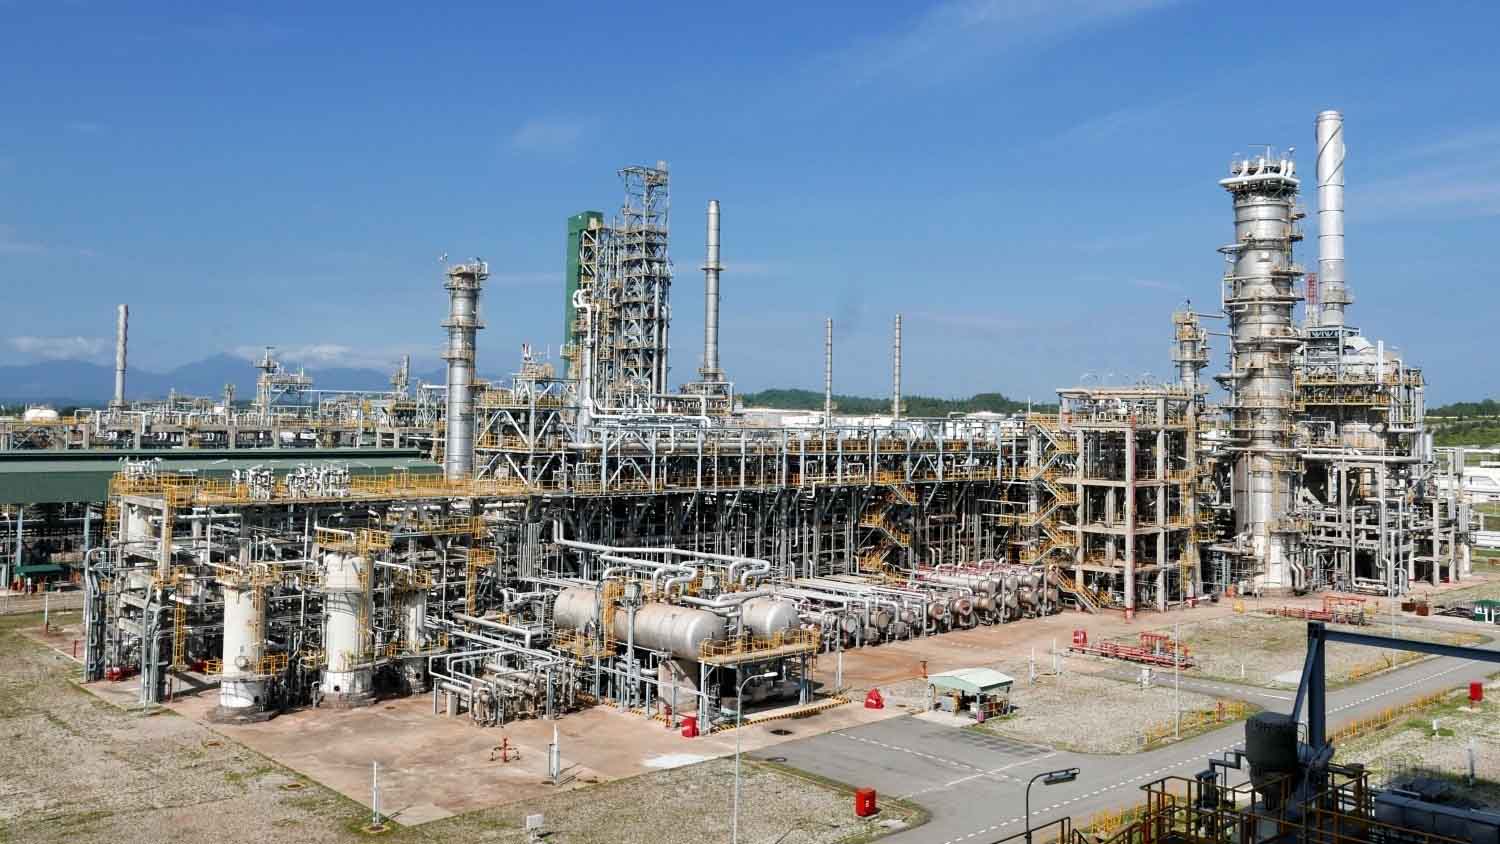 Vietnam's petrol giant PVN proposes $18bn oil refinery project